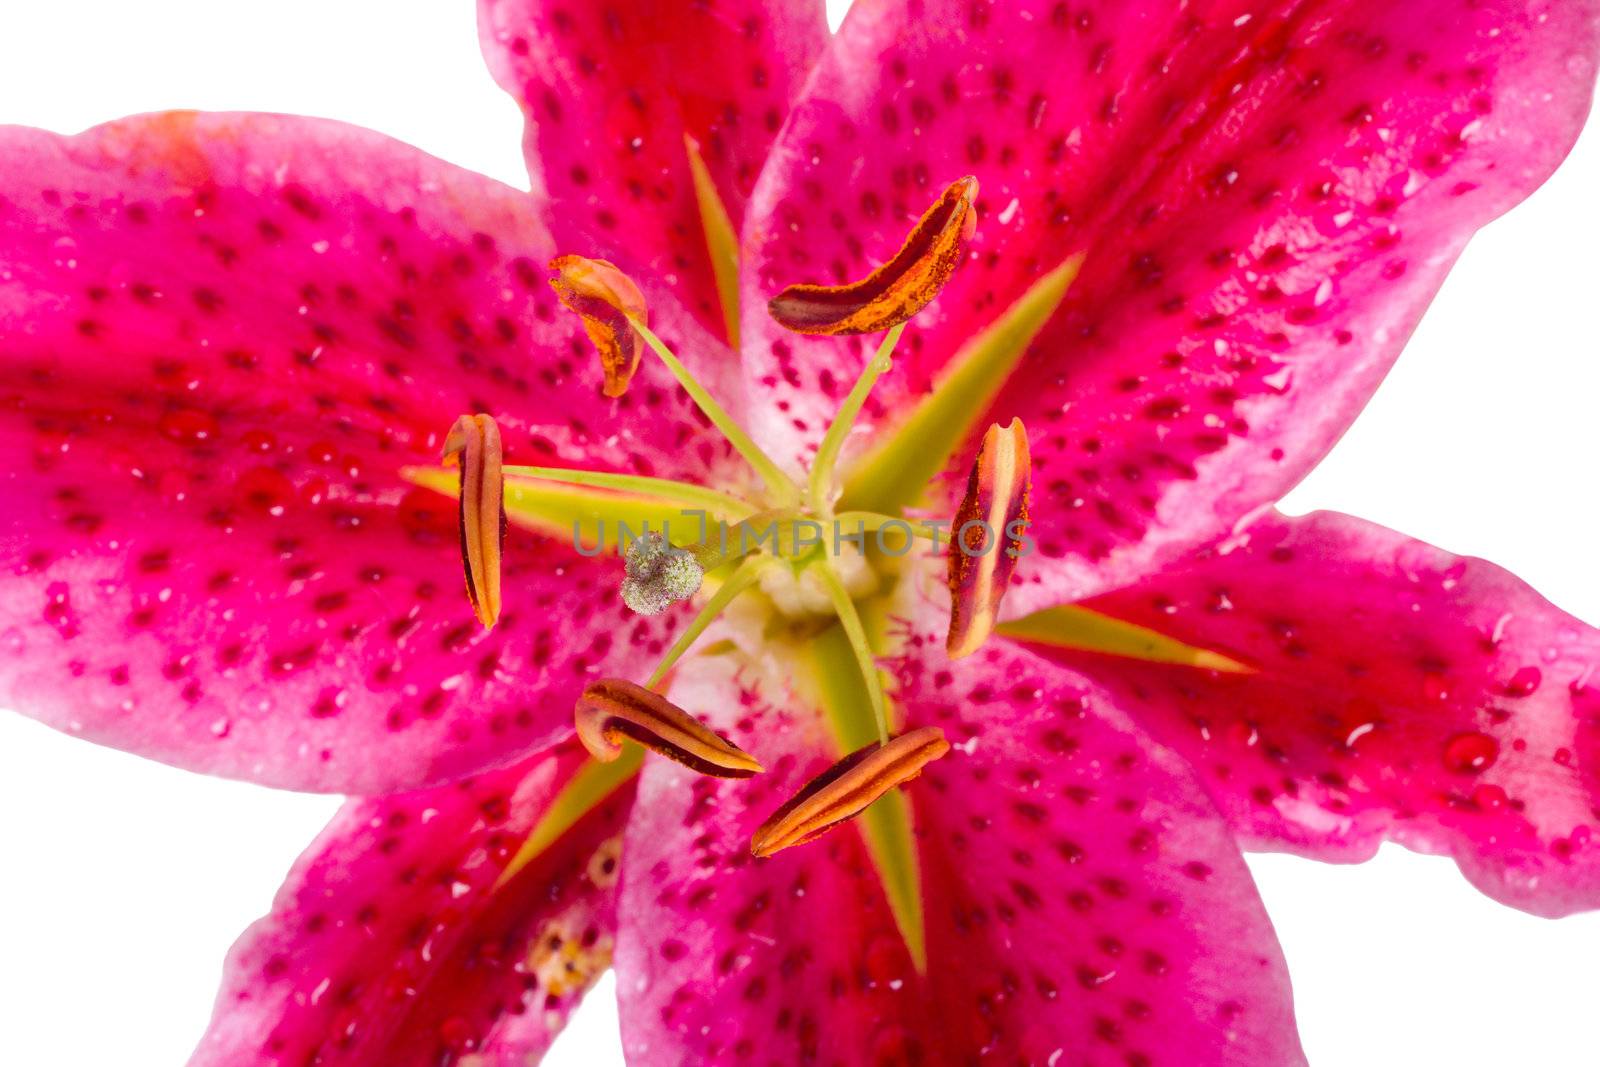 close-up pink lily, isolated on white